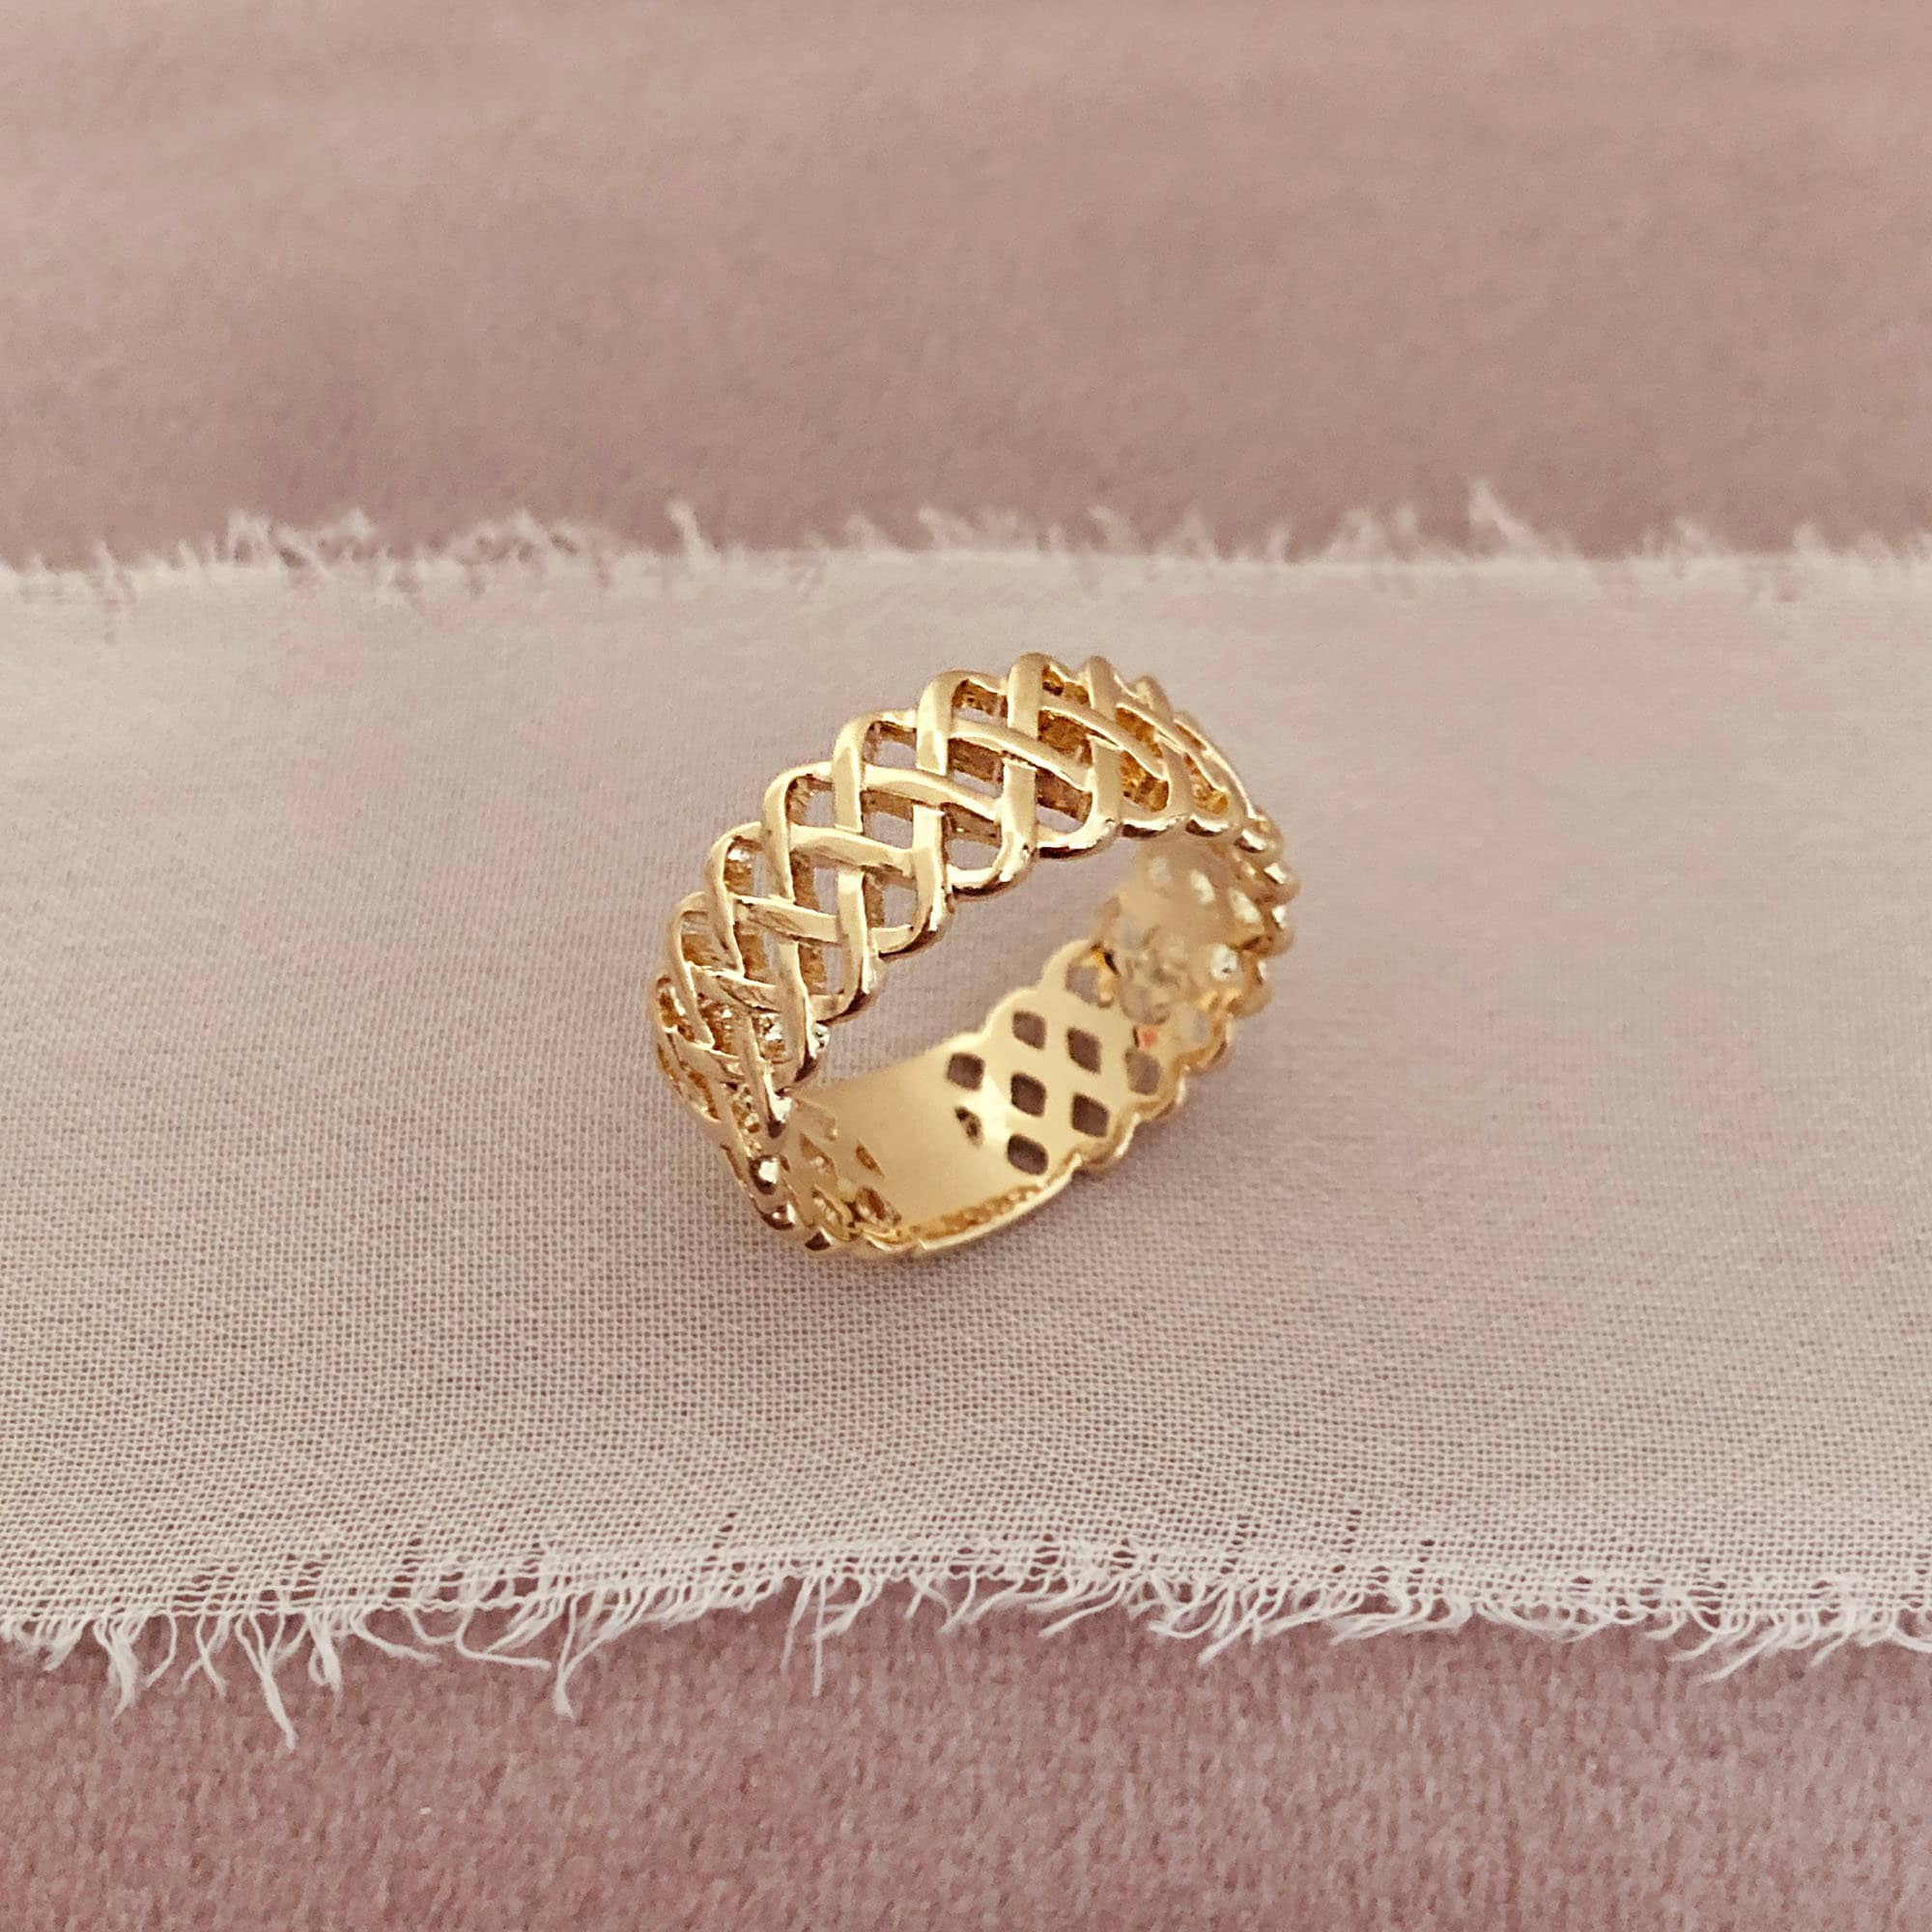 Textured Net Gold Band Ring, Geometric Thick Gold Ring for Her, Boho Edgy  Ring 